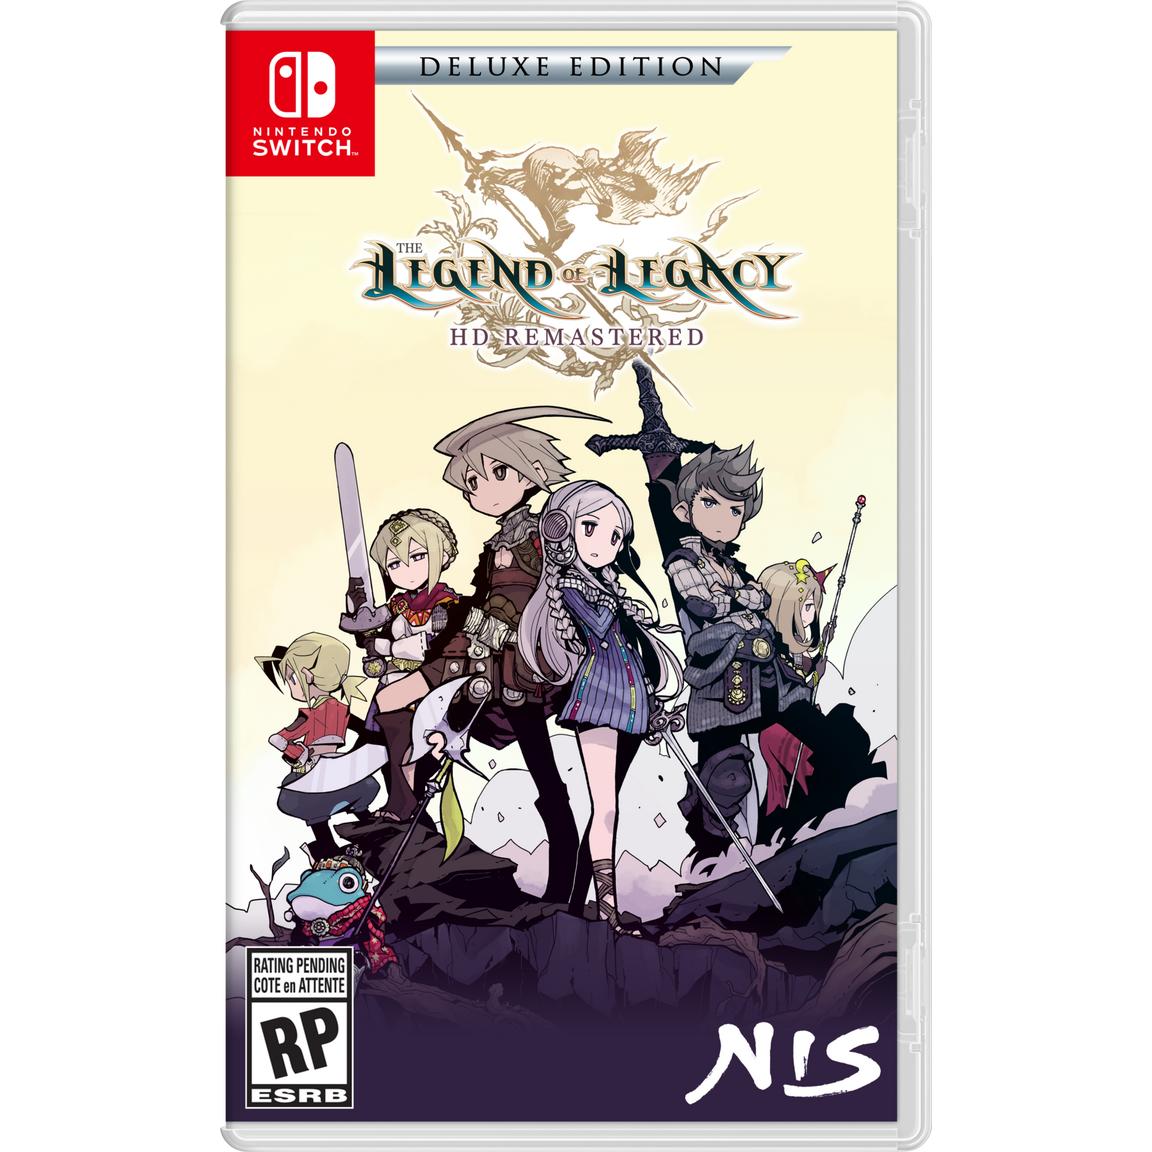 Видеоигра The Legend of Legacy HD Remastered Deluxe Edition - Nintendo Switch